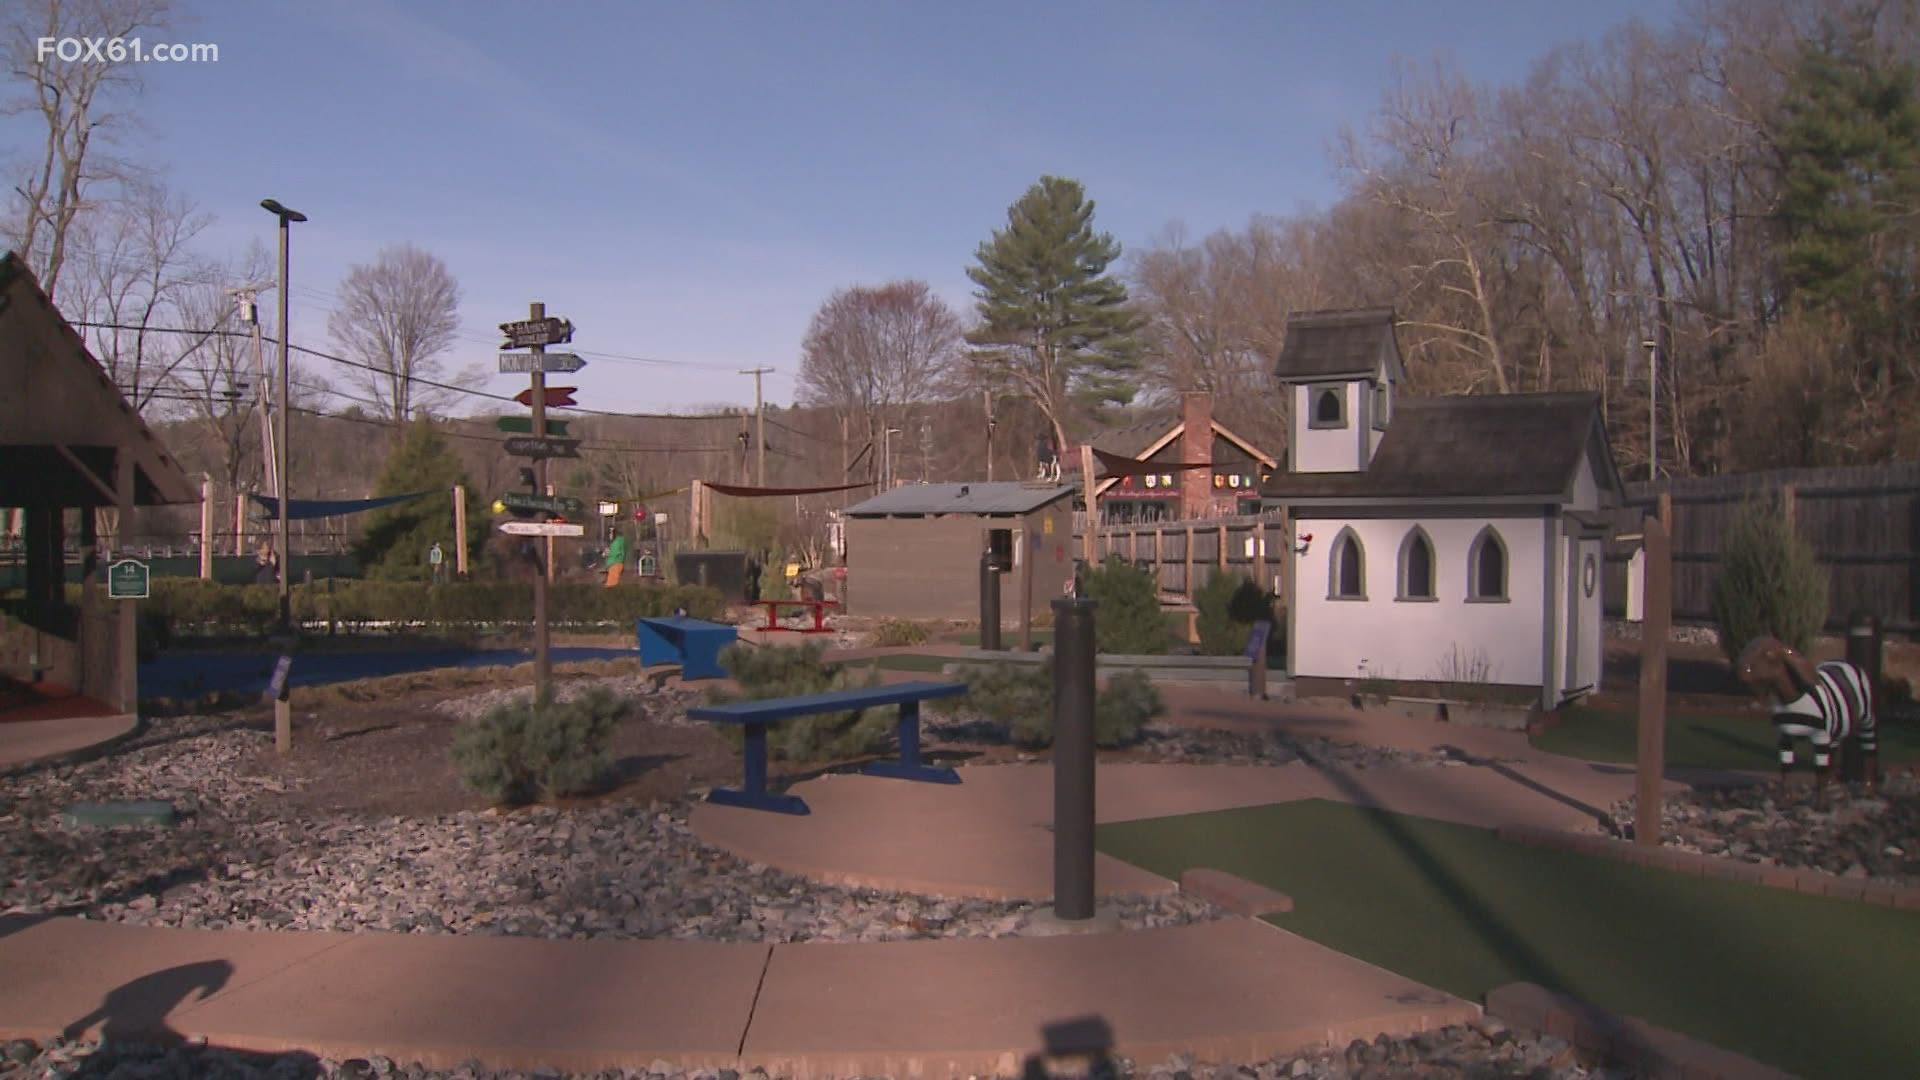 It brings the Swiss Alps to Connecticut, as a unique spot for the entire family!